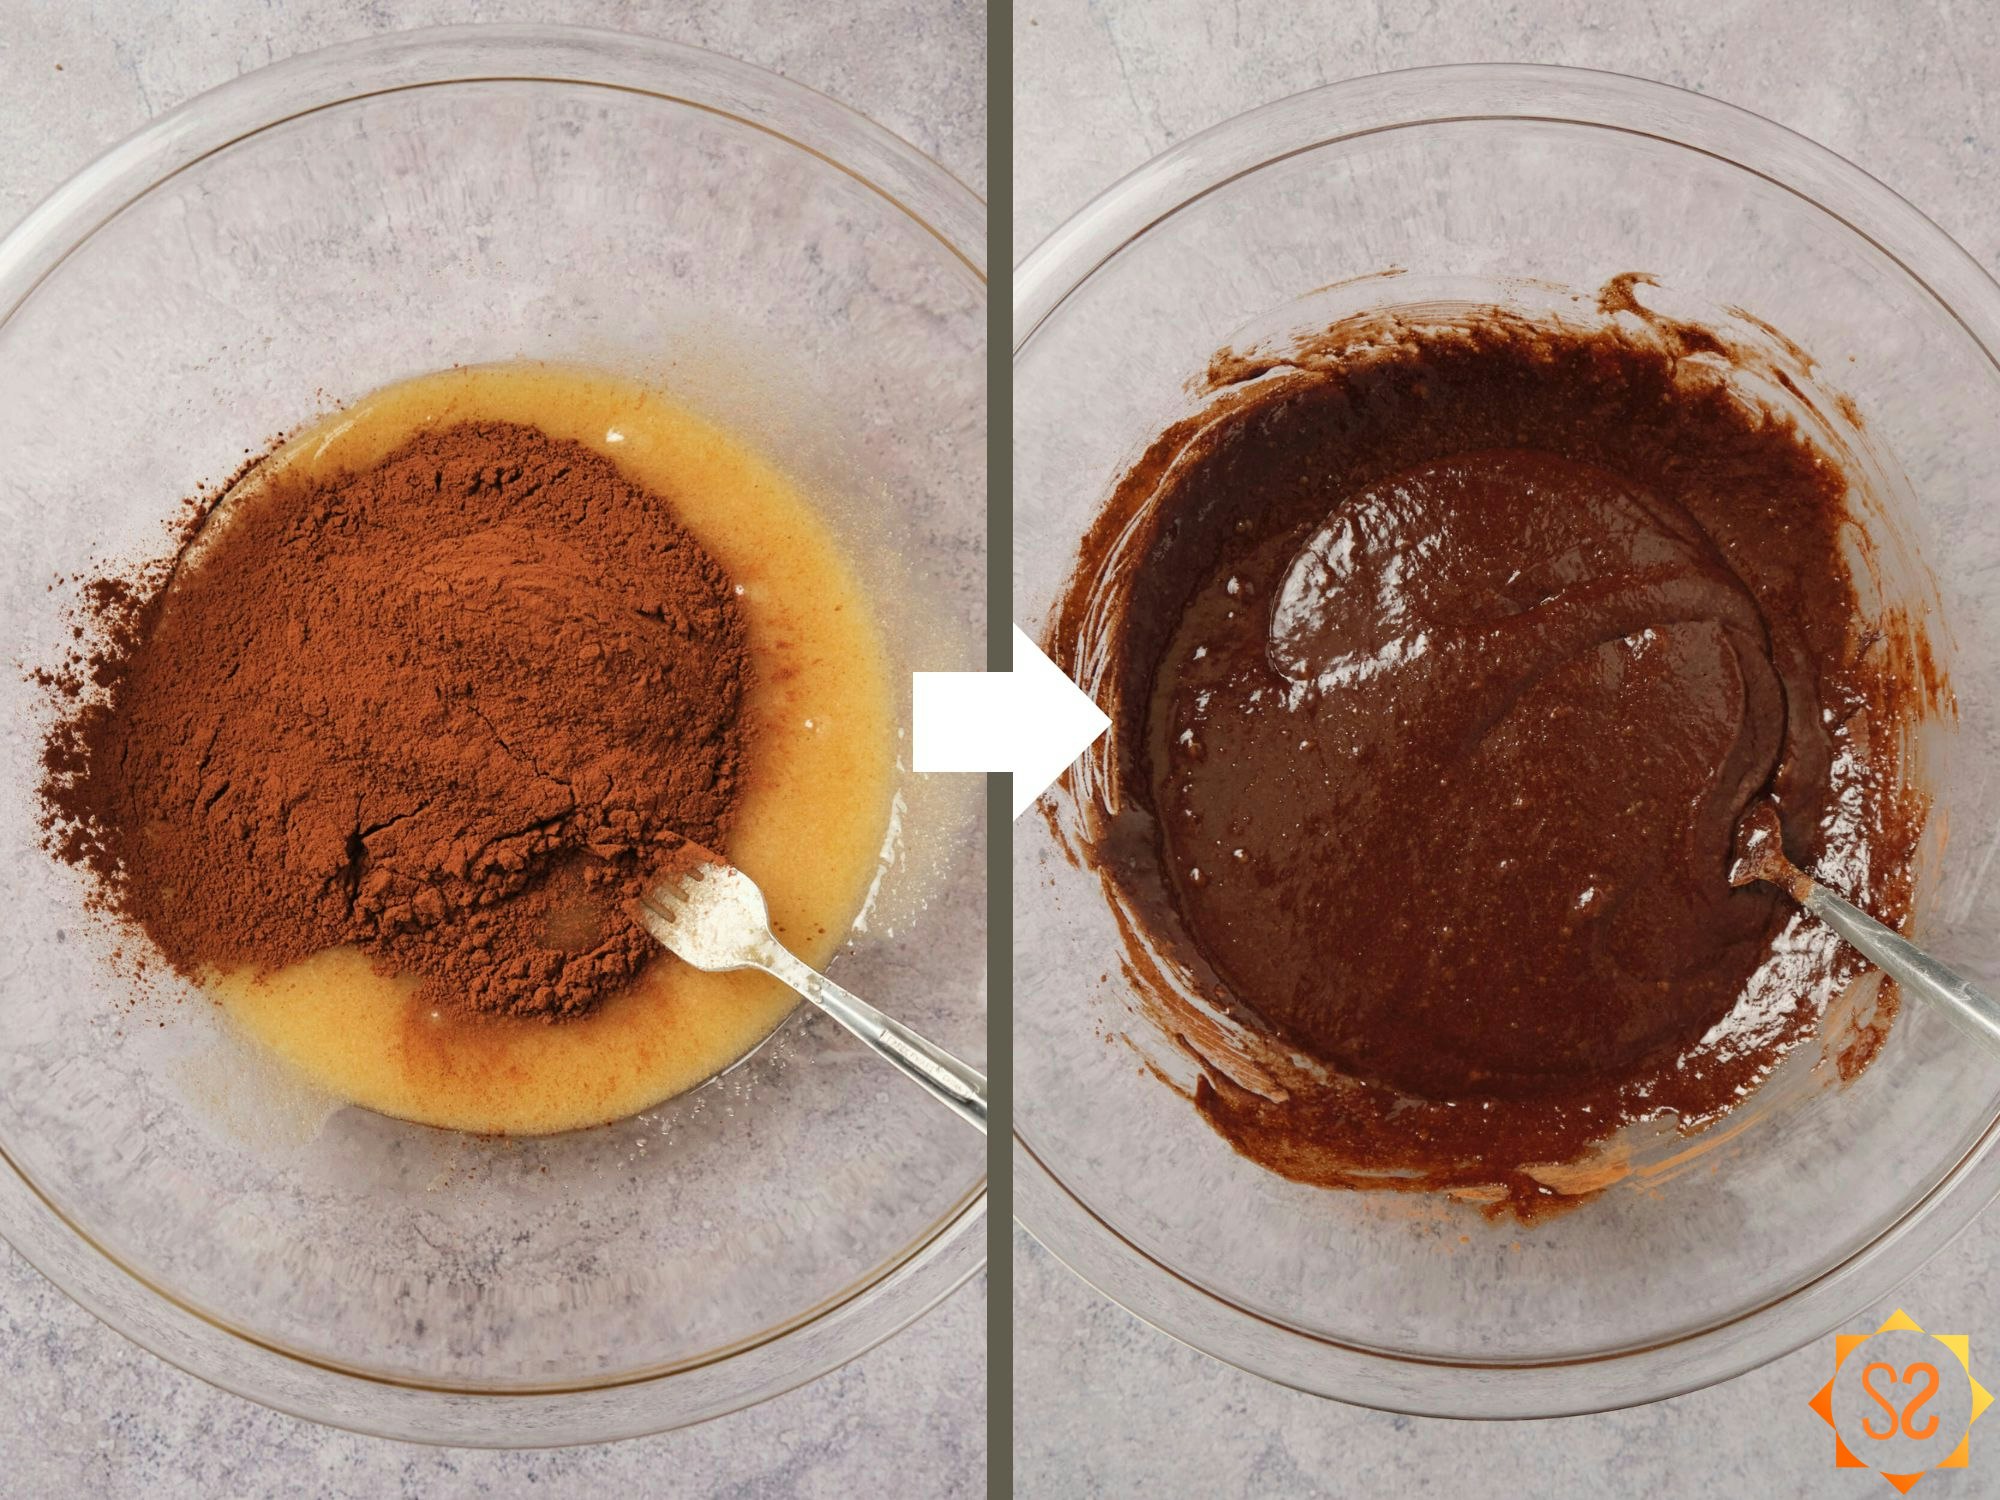 Adding cocoa powder to the wet ingredients, before (left) and after (right) mixing.